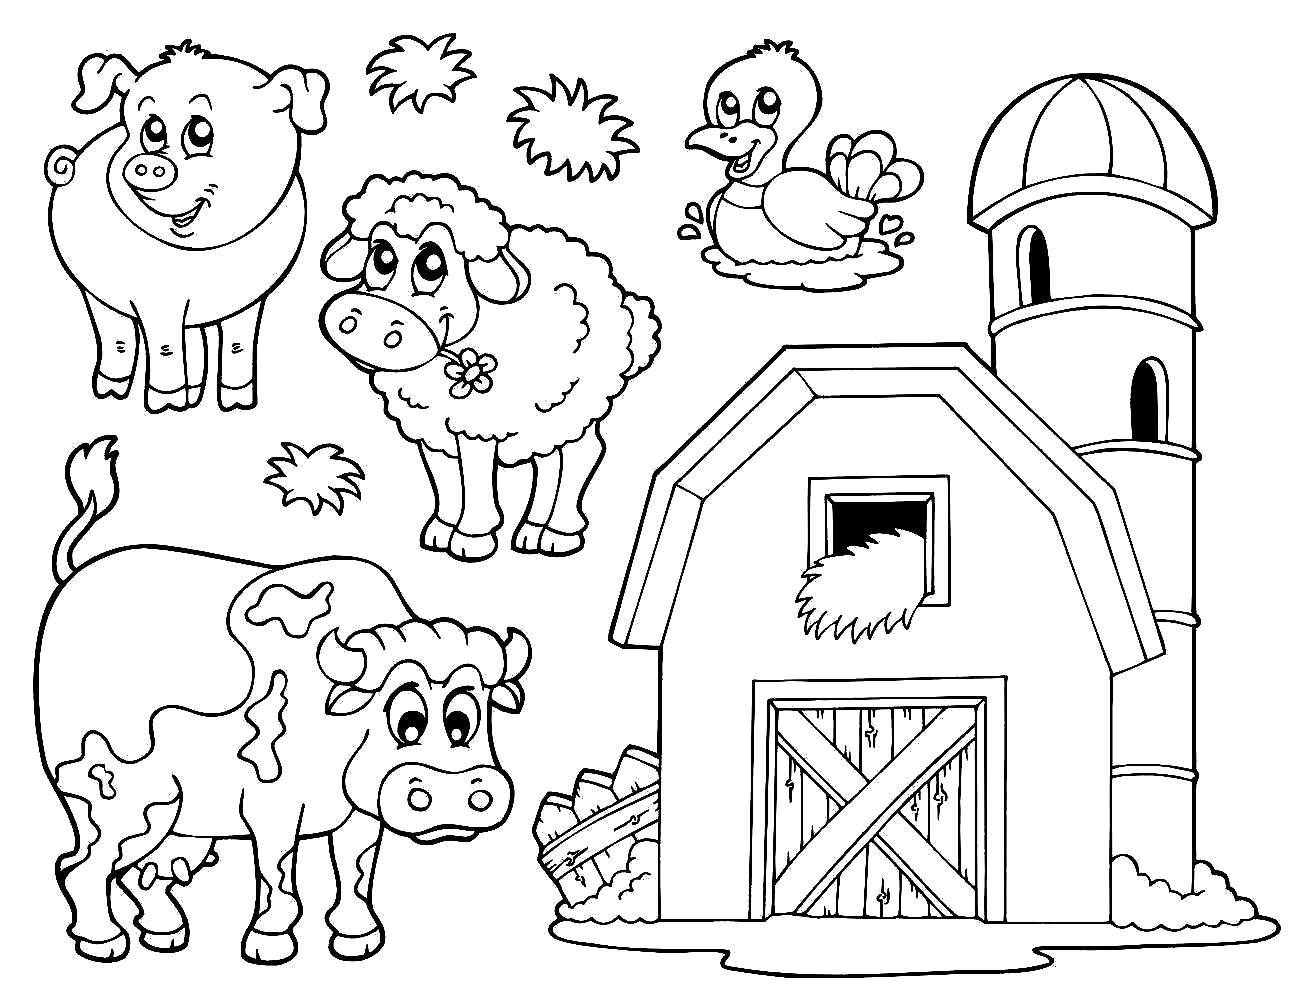 Coloring Livestock. Category animals. Tags:  Animals.